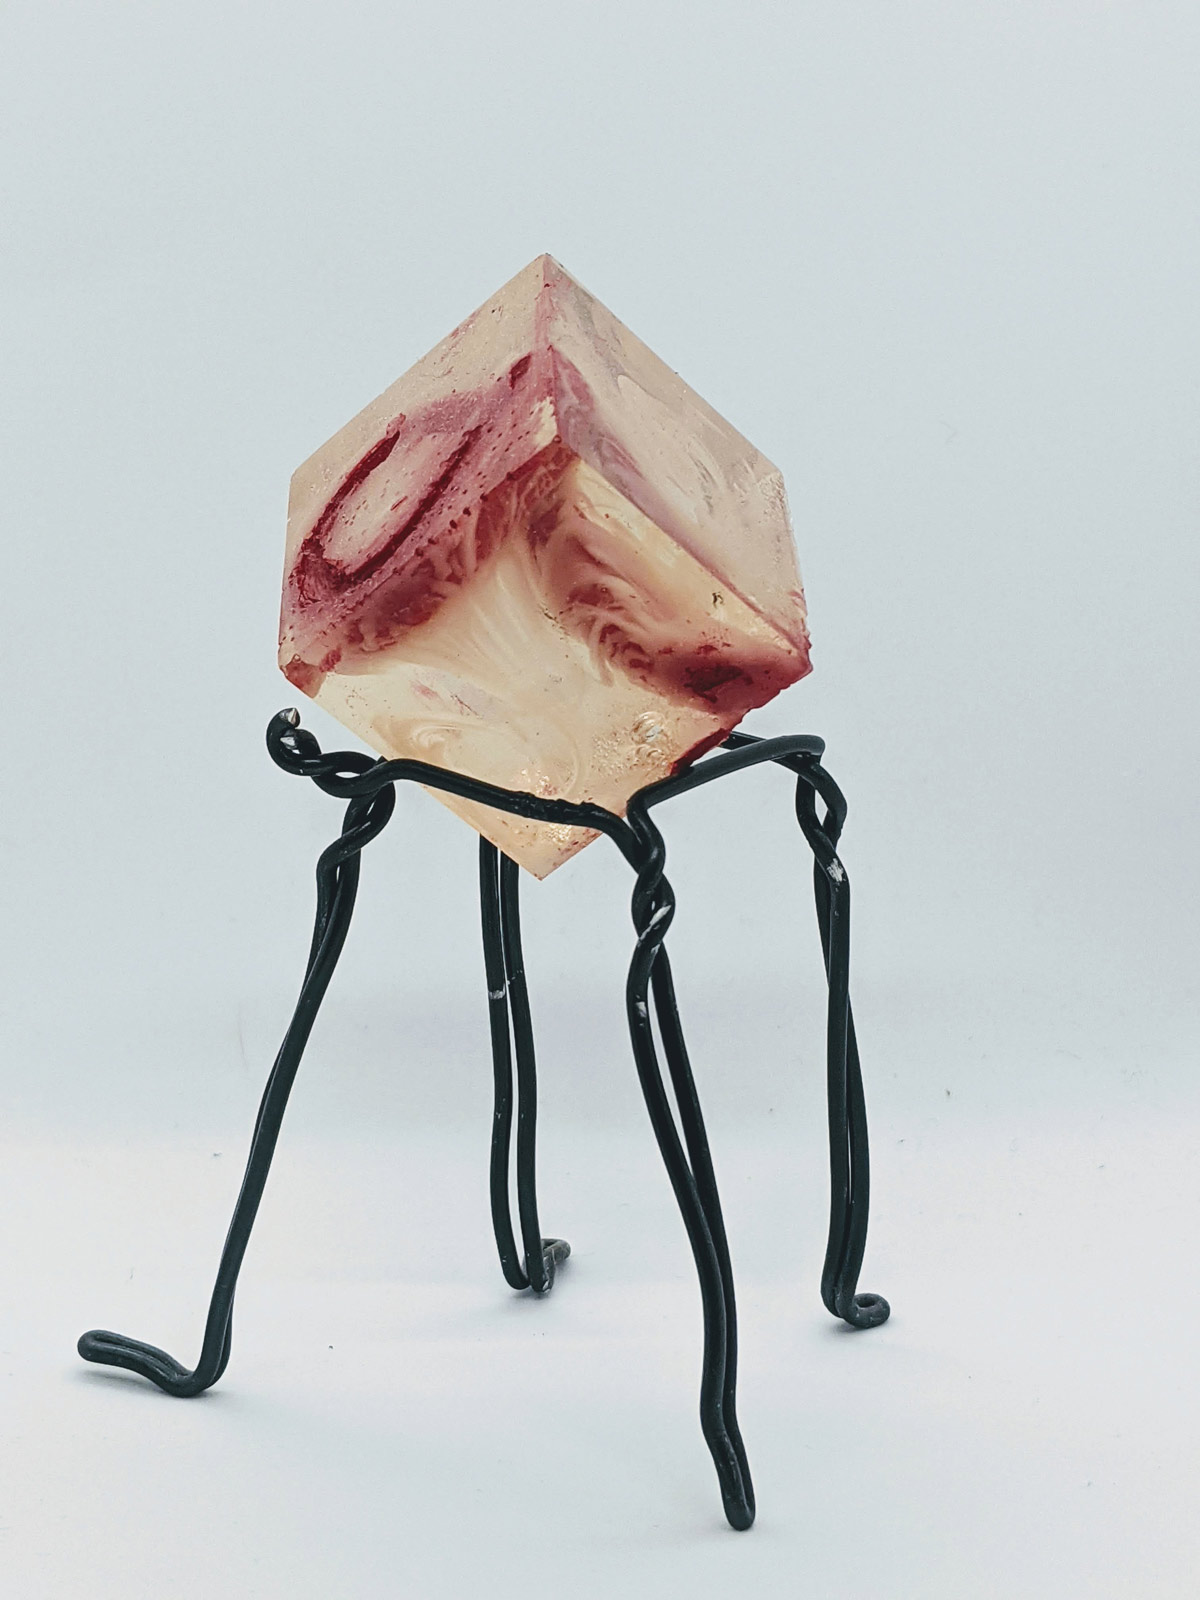 Resin cube with red paint inside to look like flesh on a metal stand